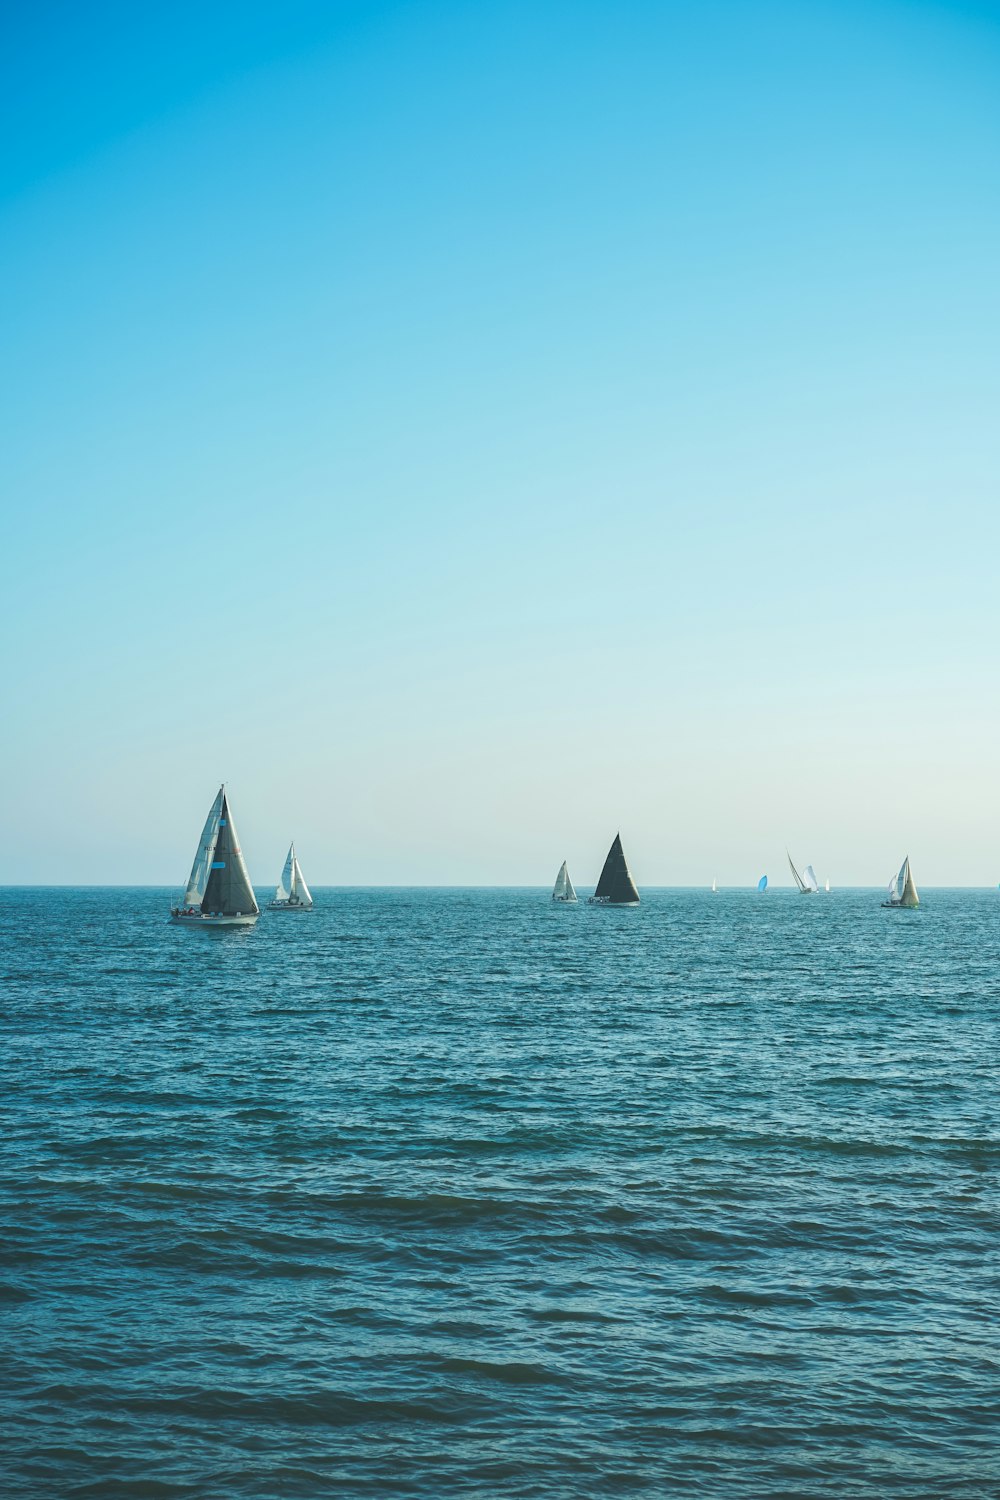 sailboats on body of water during daytime